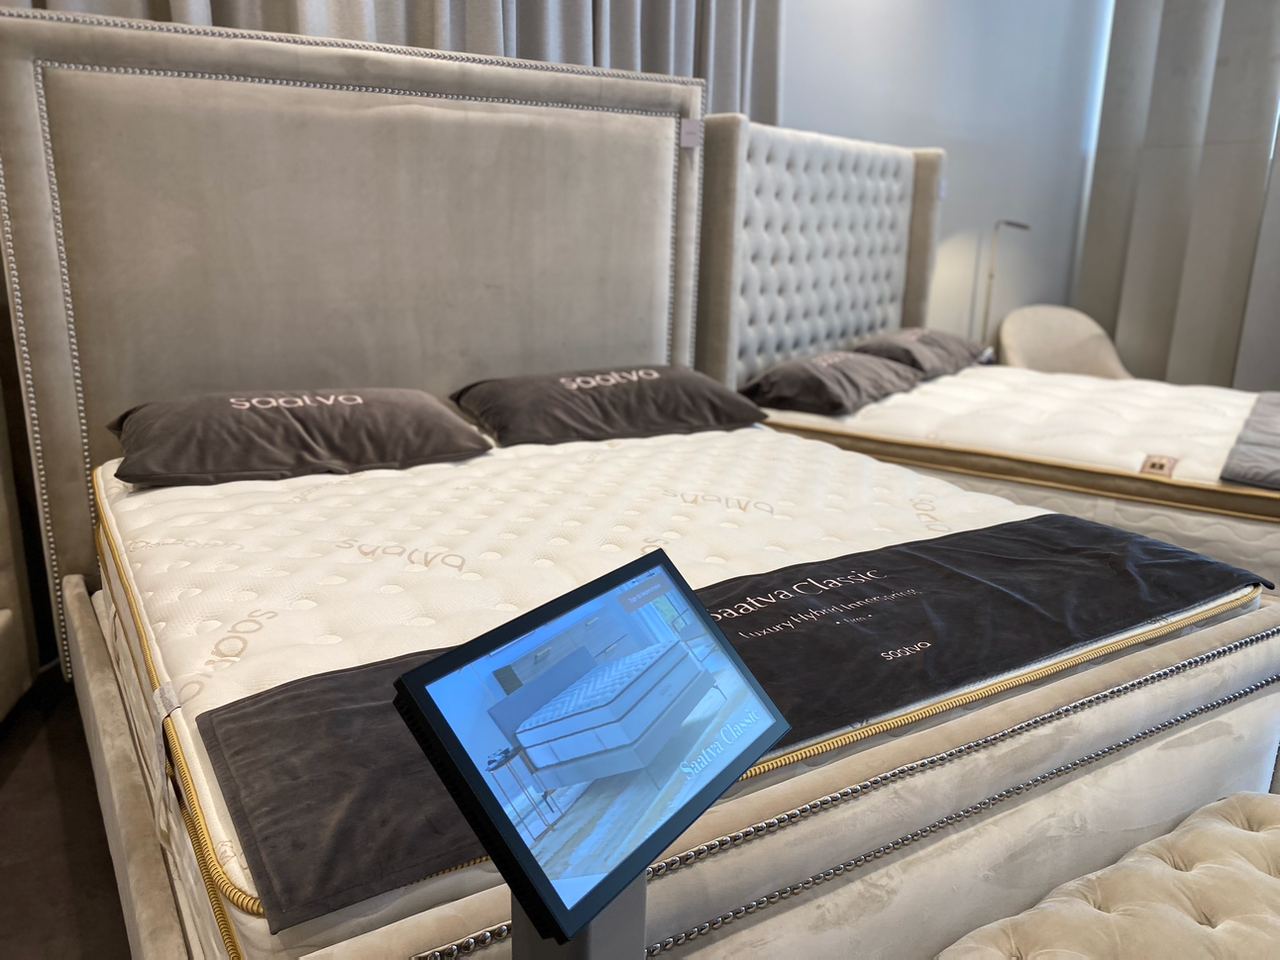 Immerse yourself in the perfect blend of luxury and comfort with the Saatva Classic mattress.